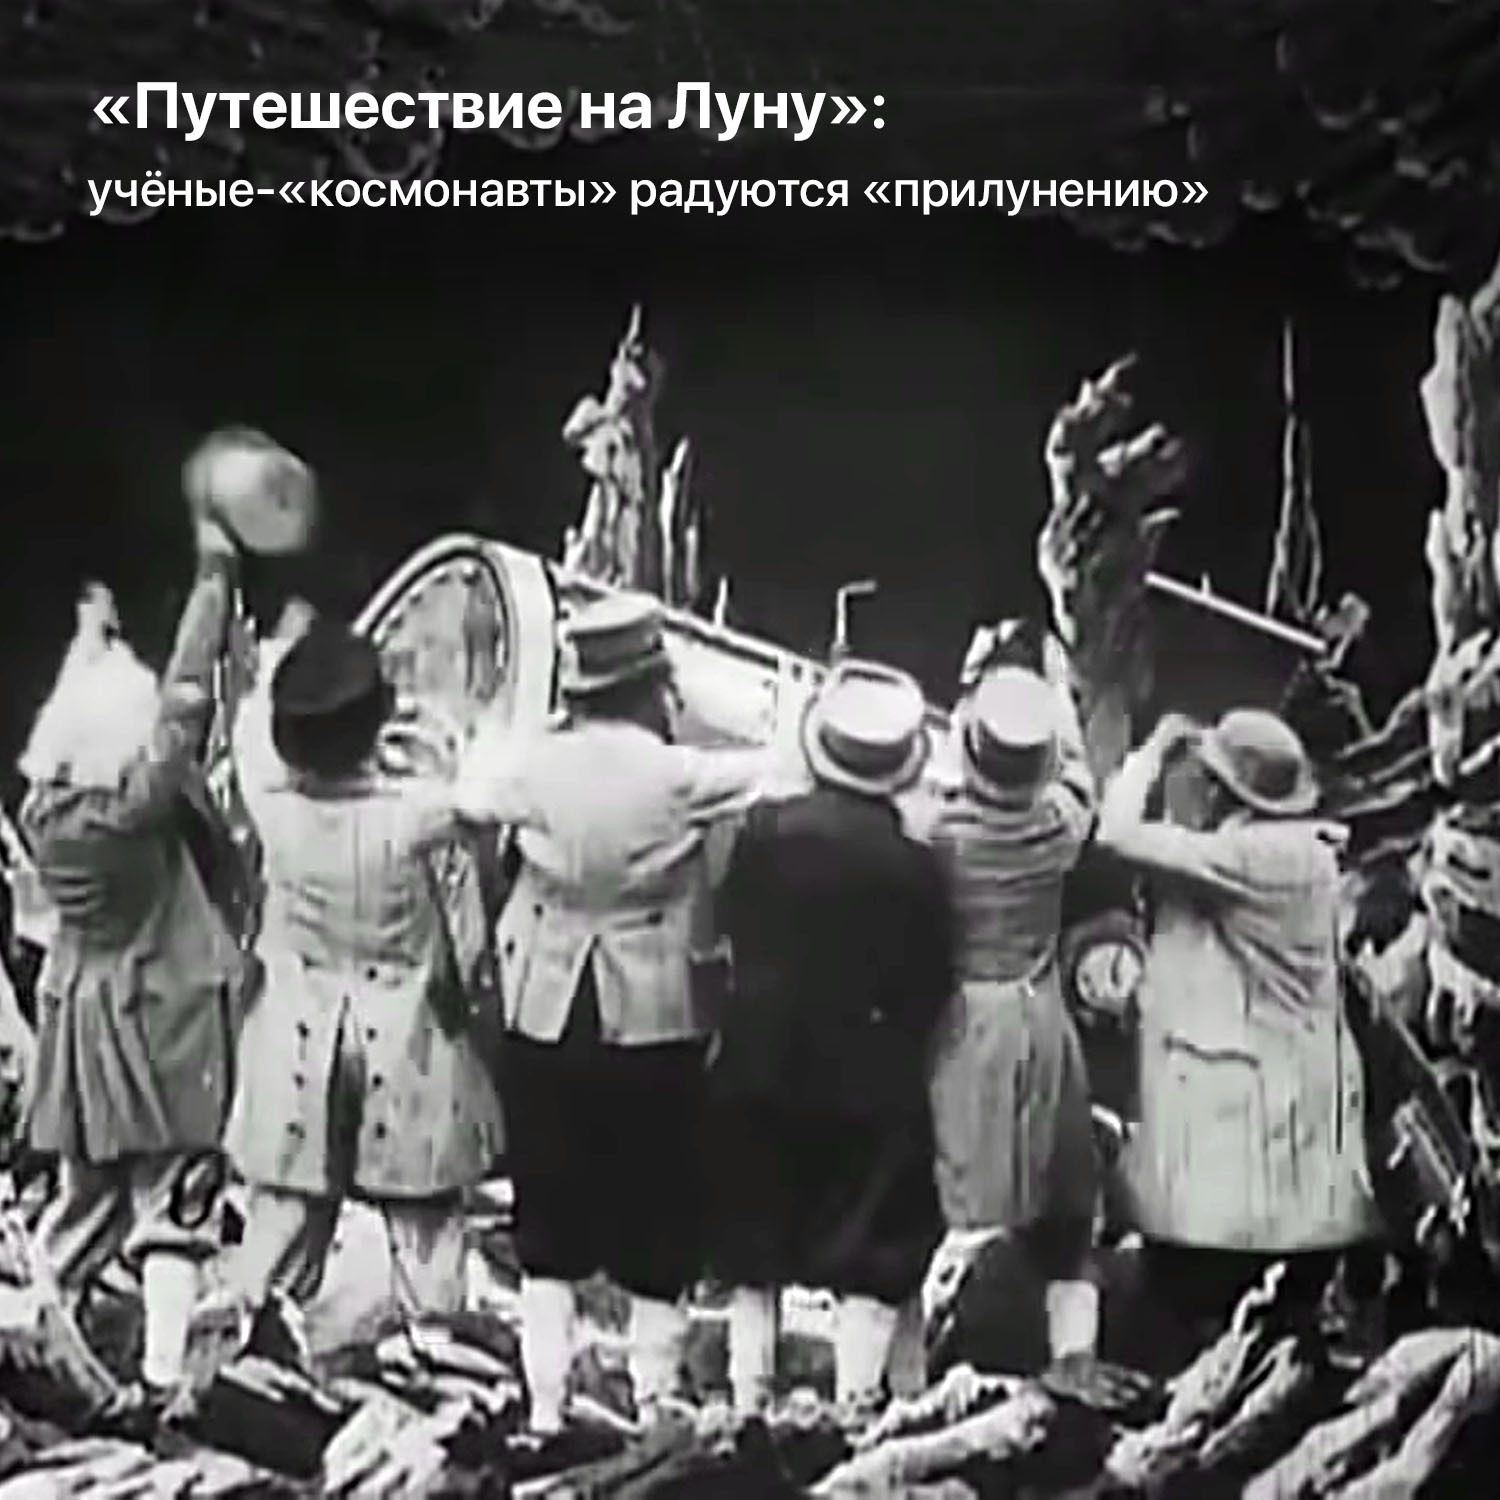 Journey to the Moon: 1902 science fiction - Space, Journey to the Moon, Jules Verne, H.G. Wells, Silent movie, Video, Longpost